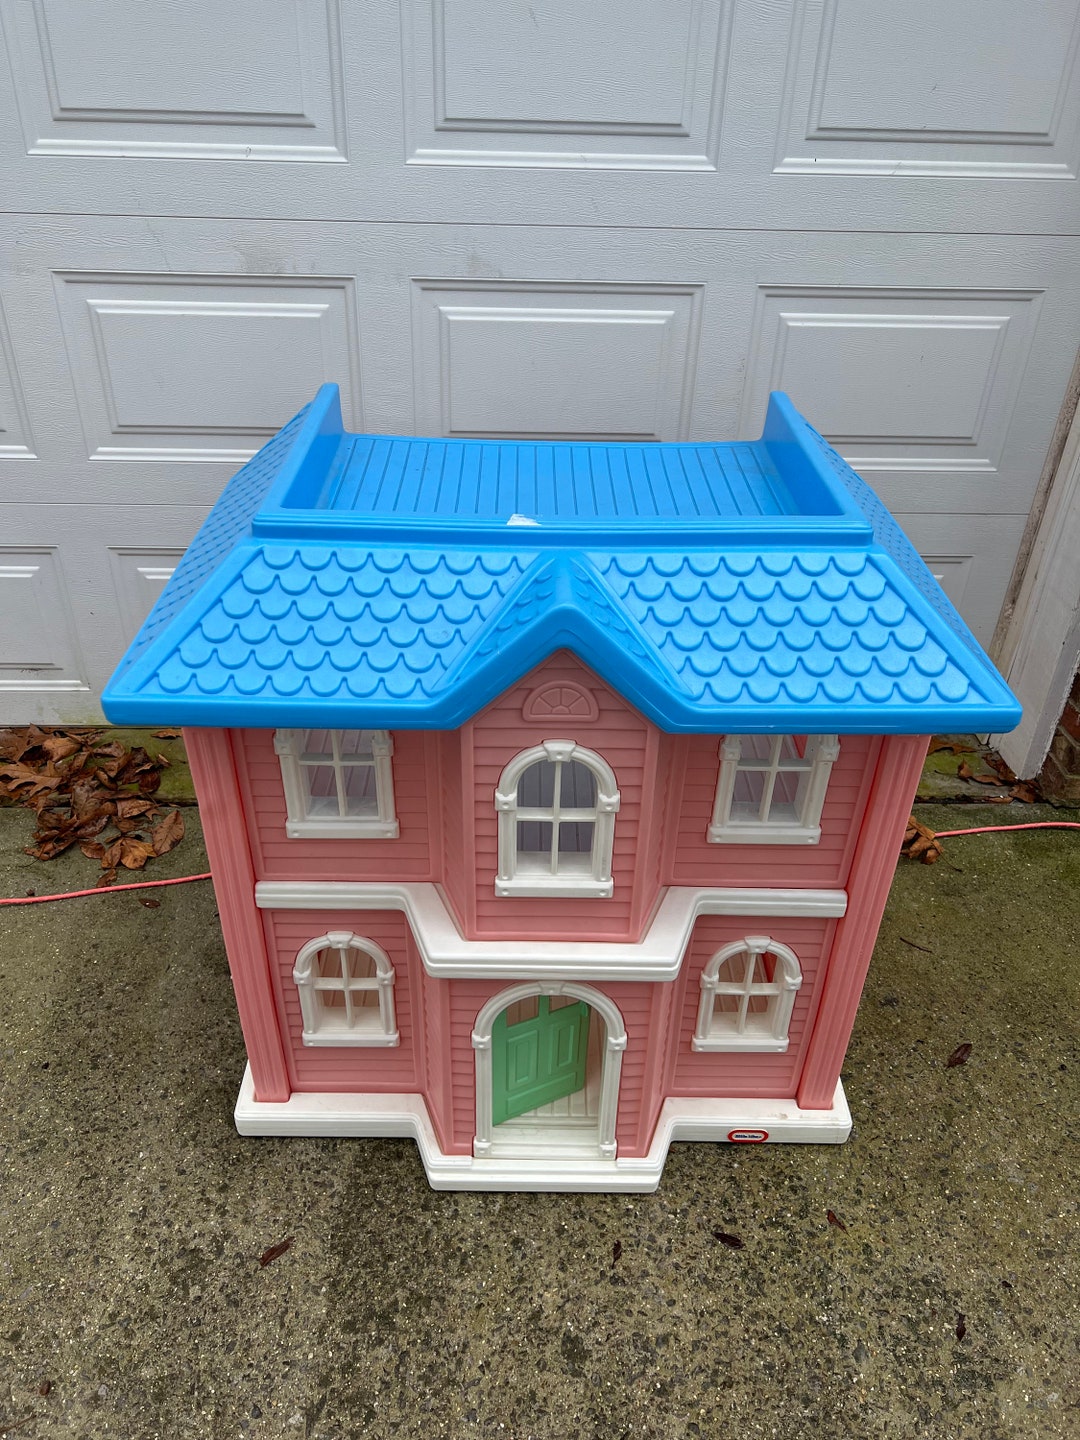 Small World: Exploring the Charm of 90s Doll Houses